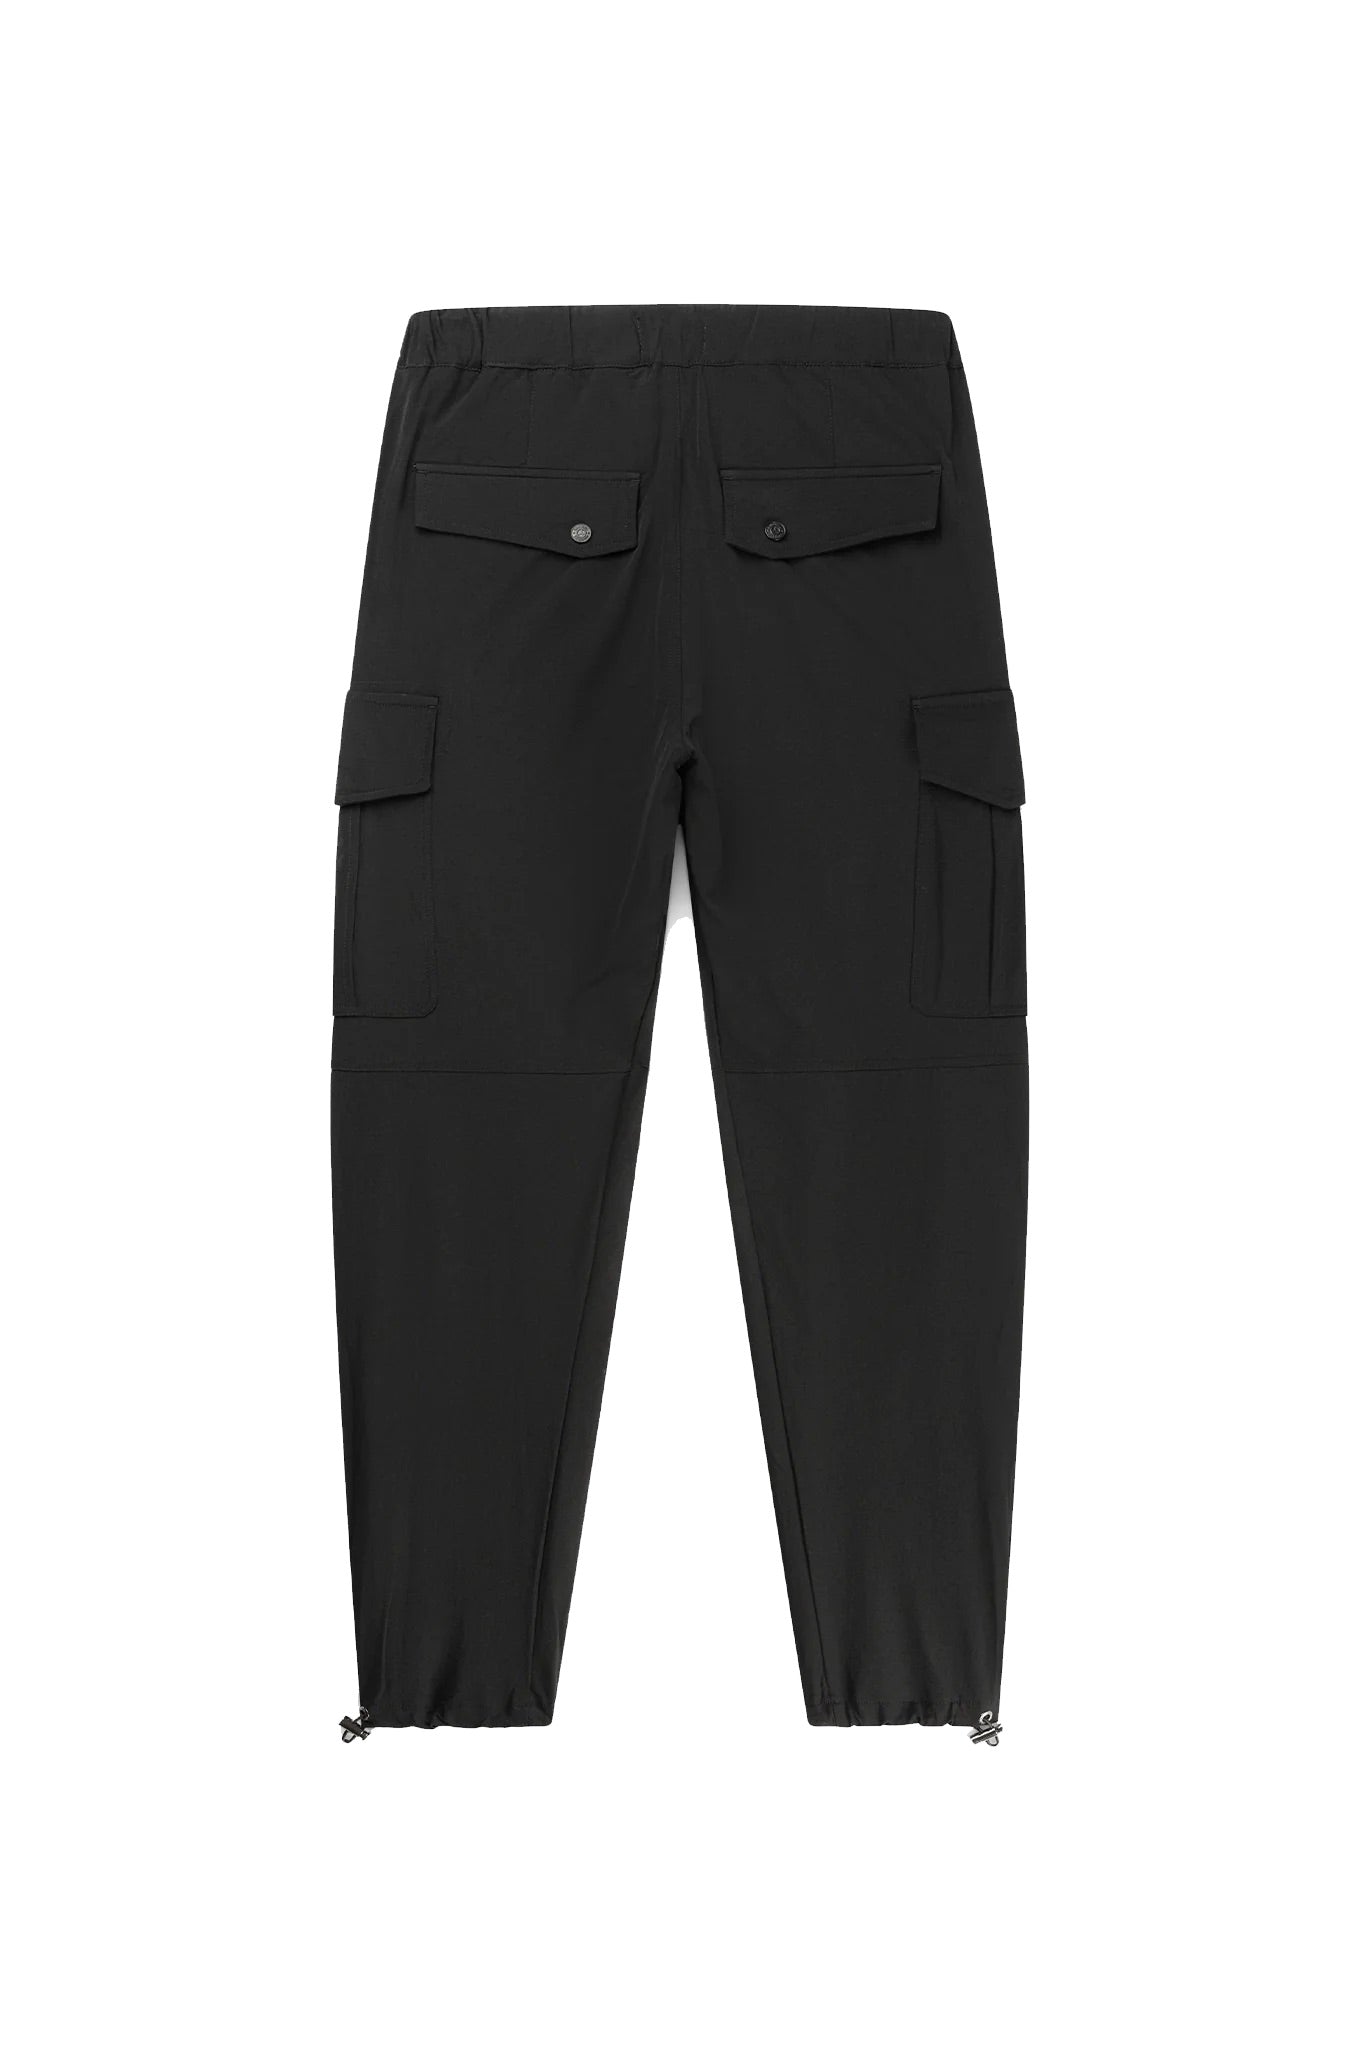 QUOTRELL COUTURE | Seattle Cargo Pants - Black